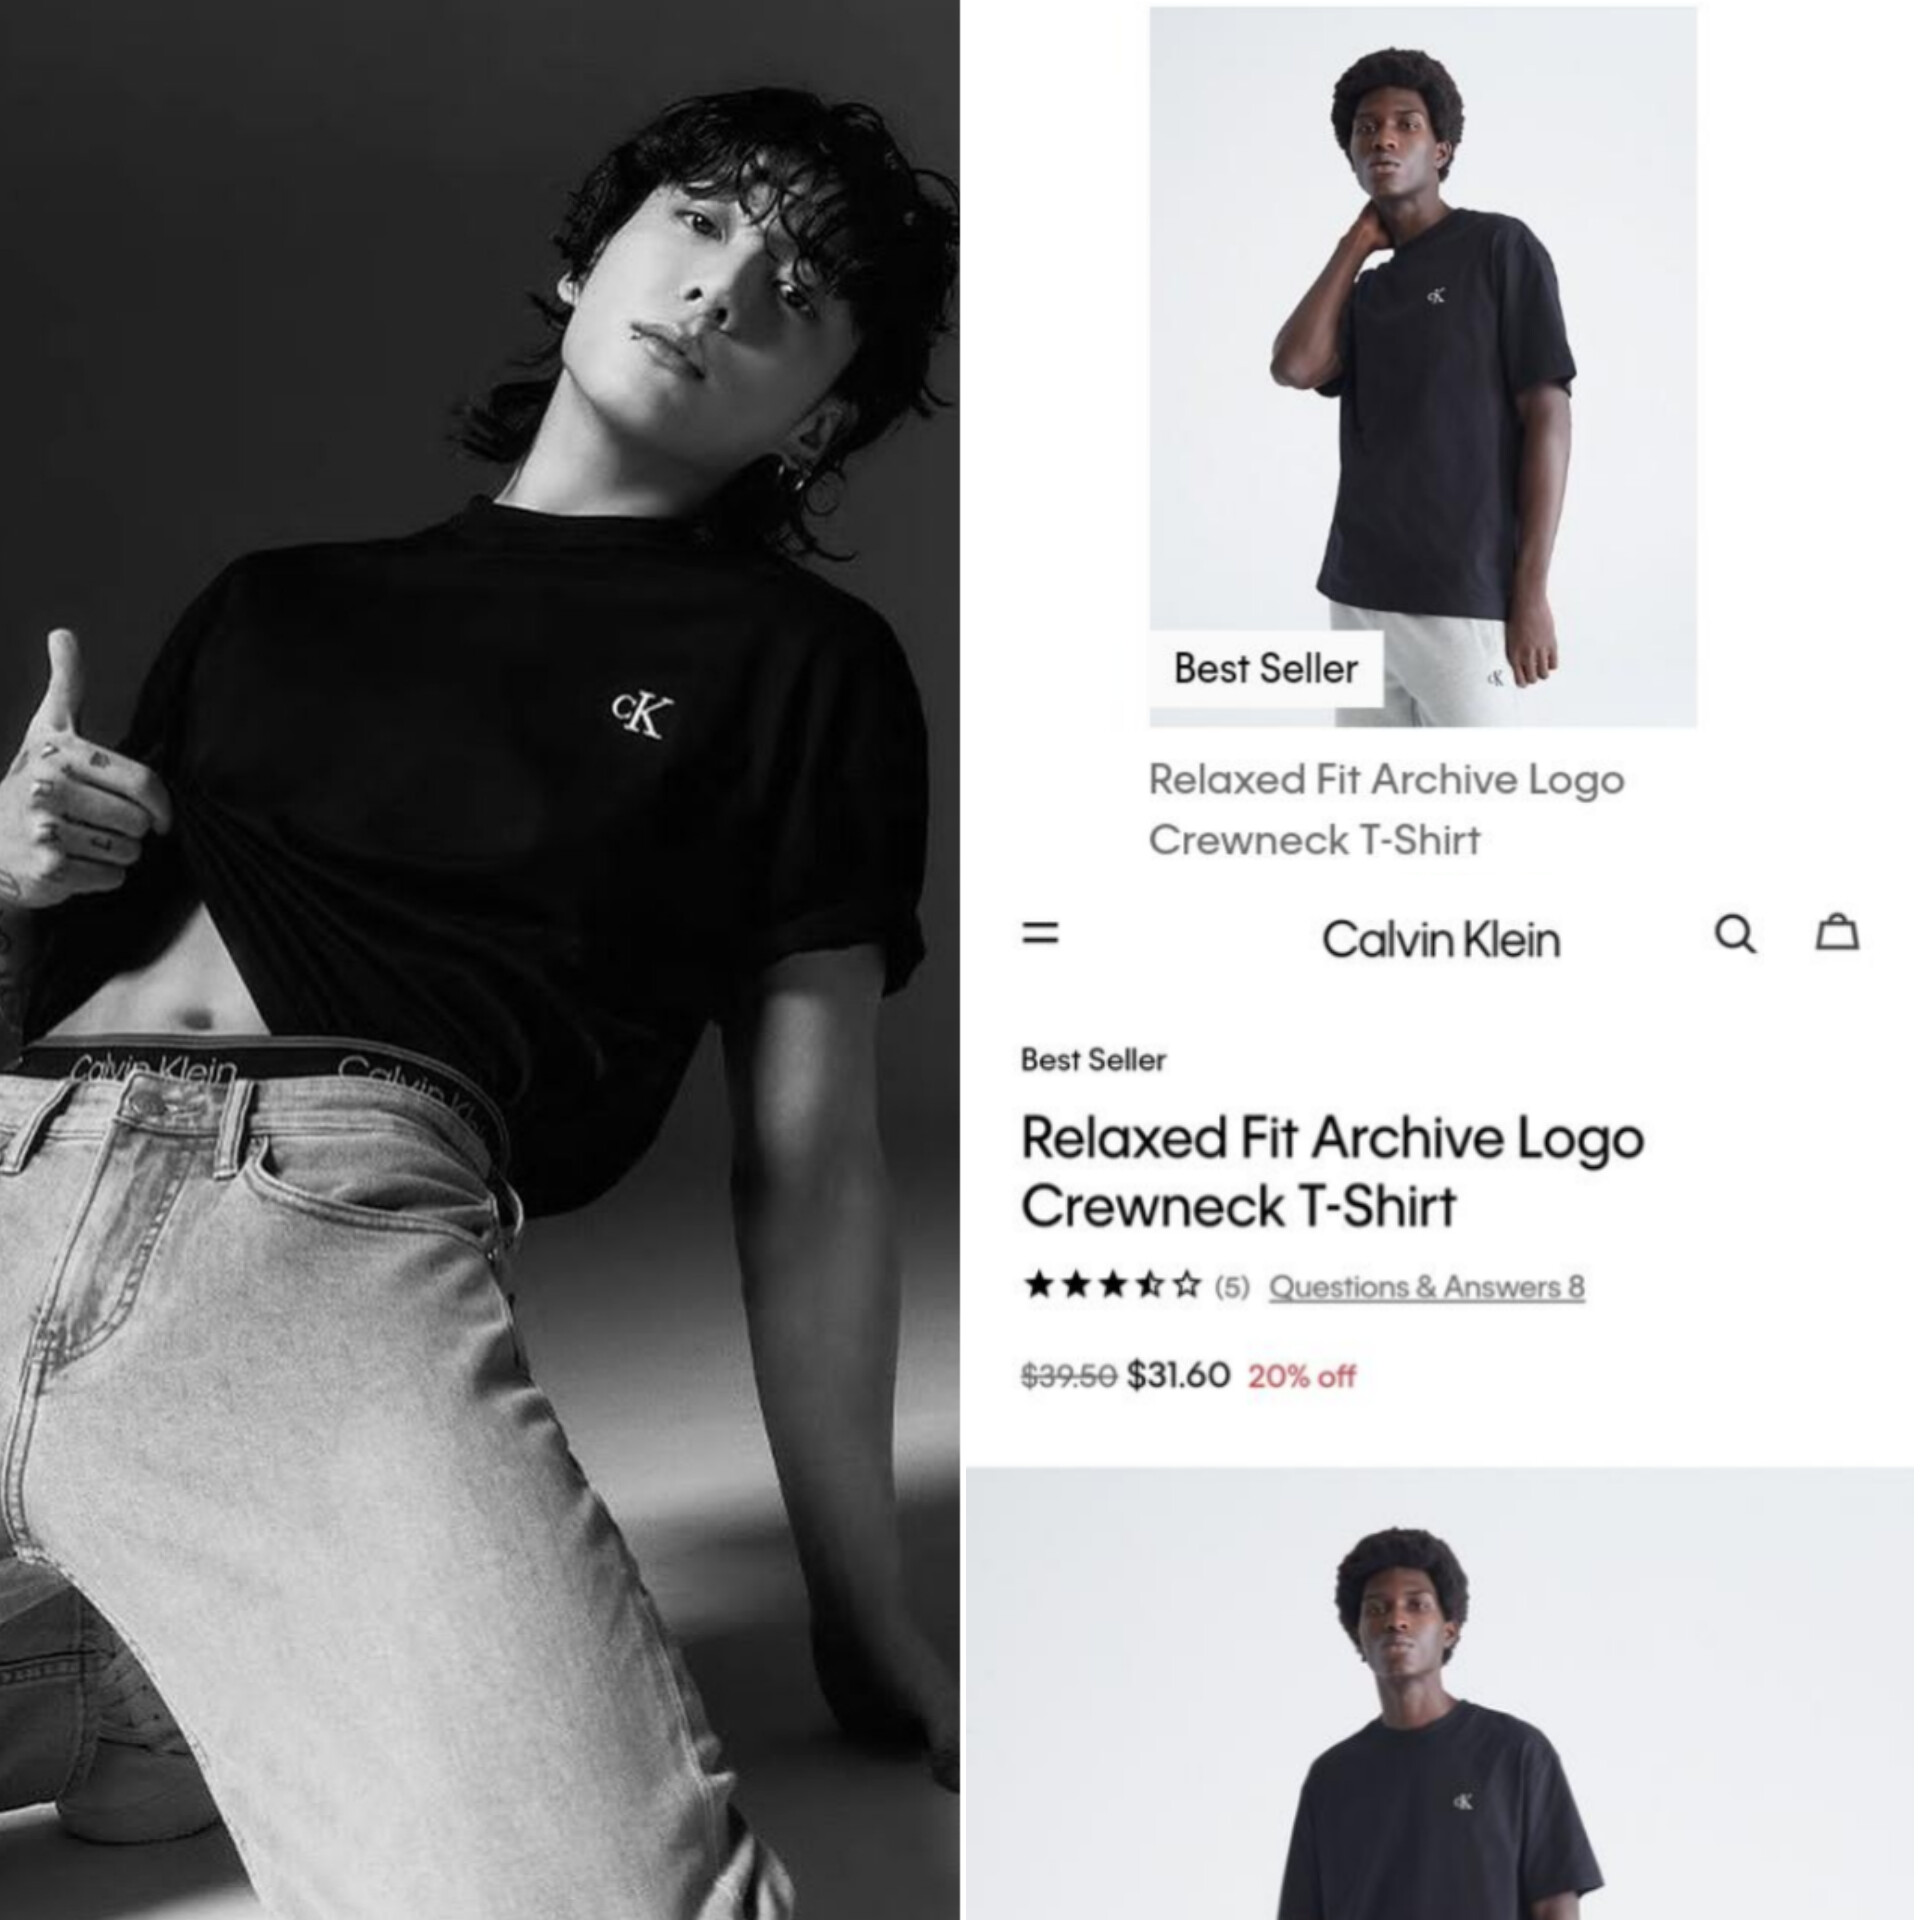 Jungkook SNS  on X: The CK T-shirt worn by JungKook in the picture  (despite not yet uploaded by CK on any platforms except Chinese site) is  the Best Seller on @CalvinKlein